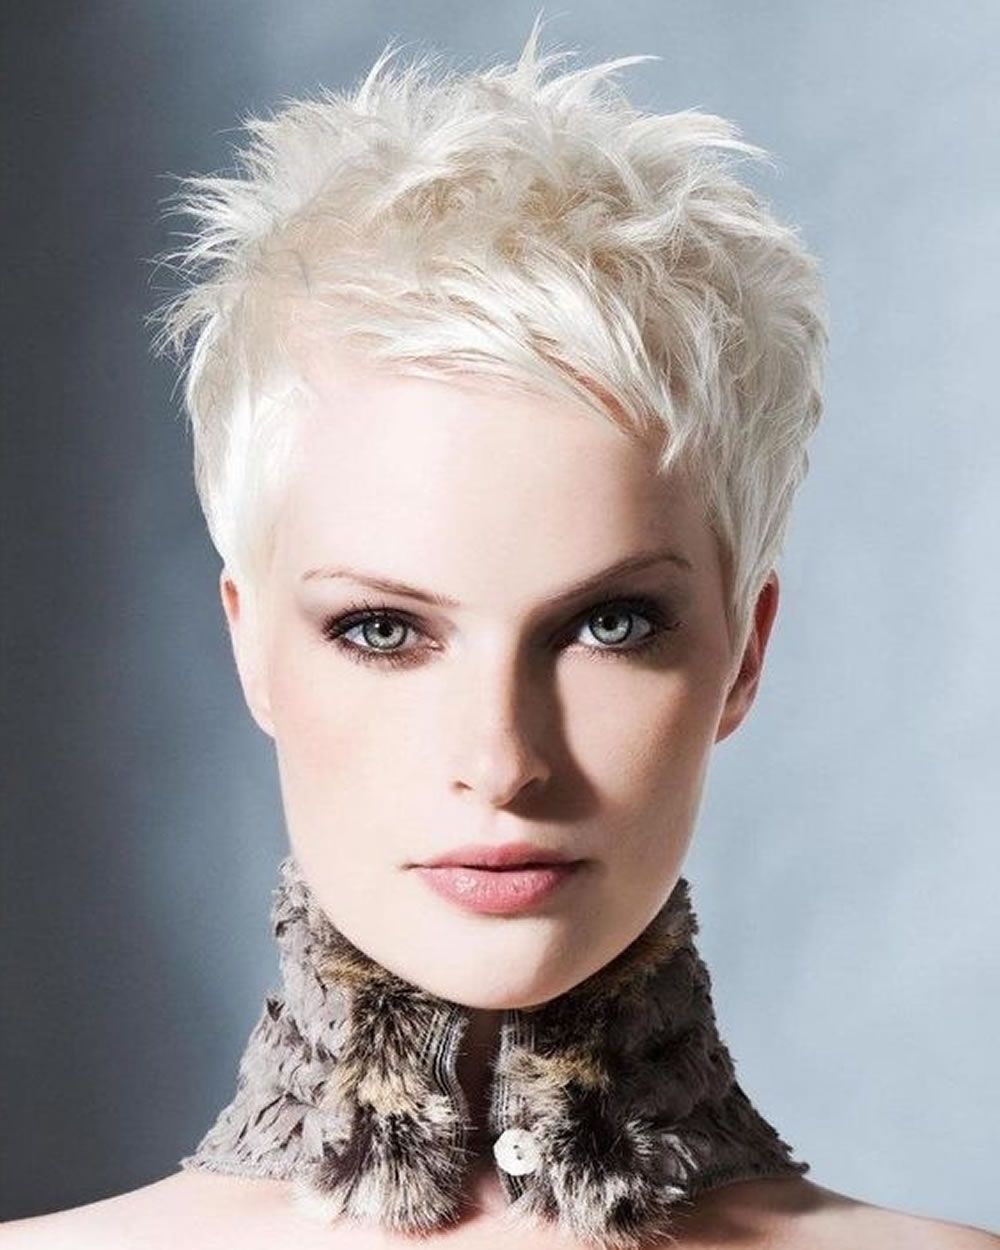 Super Very Short Pixie Haircuts & Hair Colors For 2018 2019 | Page With Latest Short Pixie Hairstyles For Women (View 8 of 15)